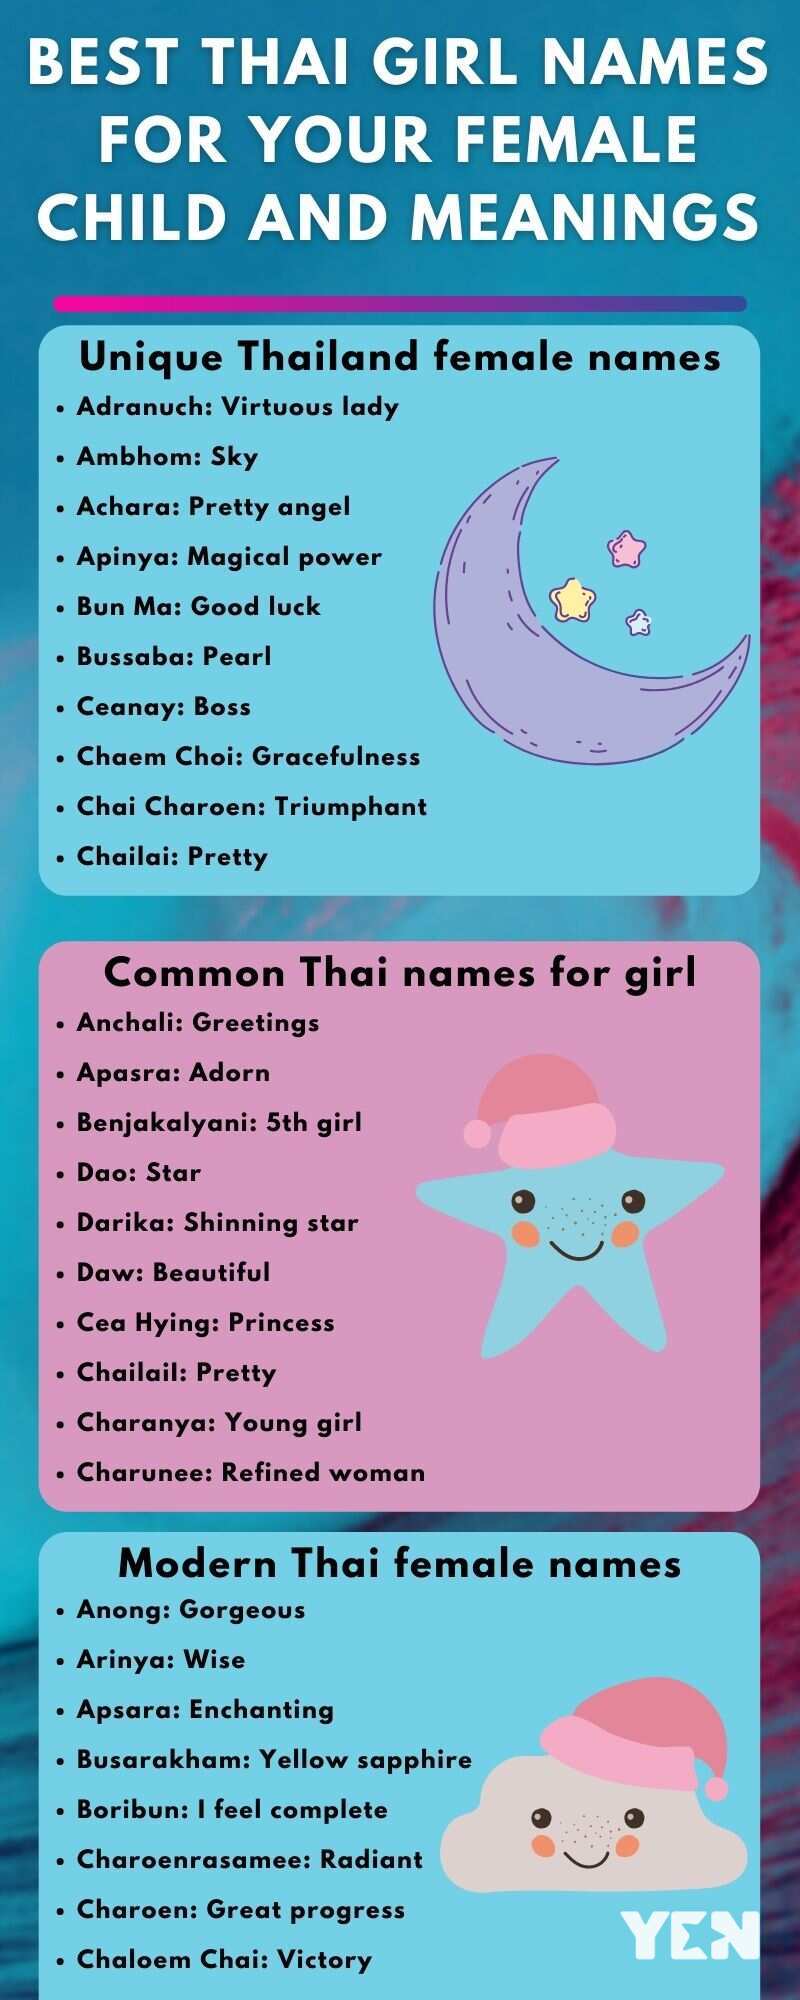 Thai girl names for your child